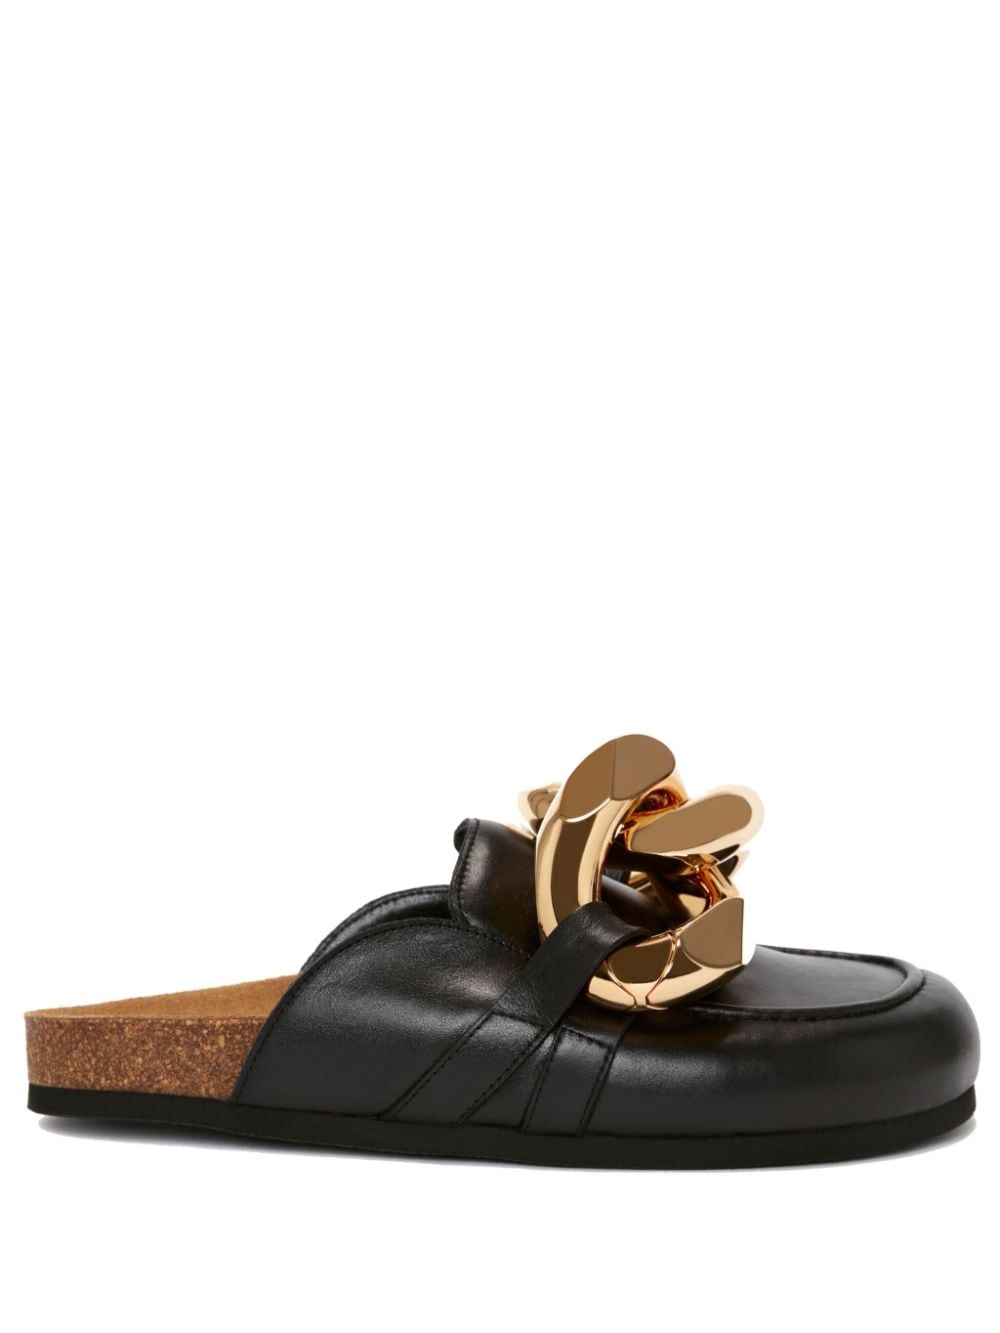 JW Anderson chain-link leather mules - Black